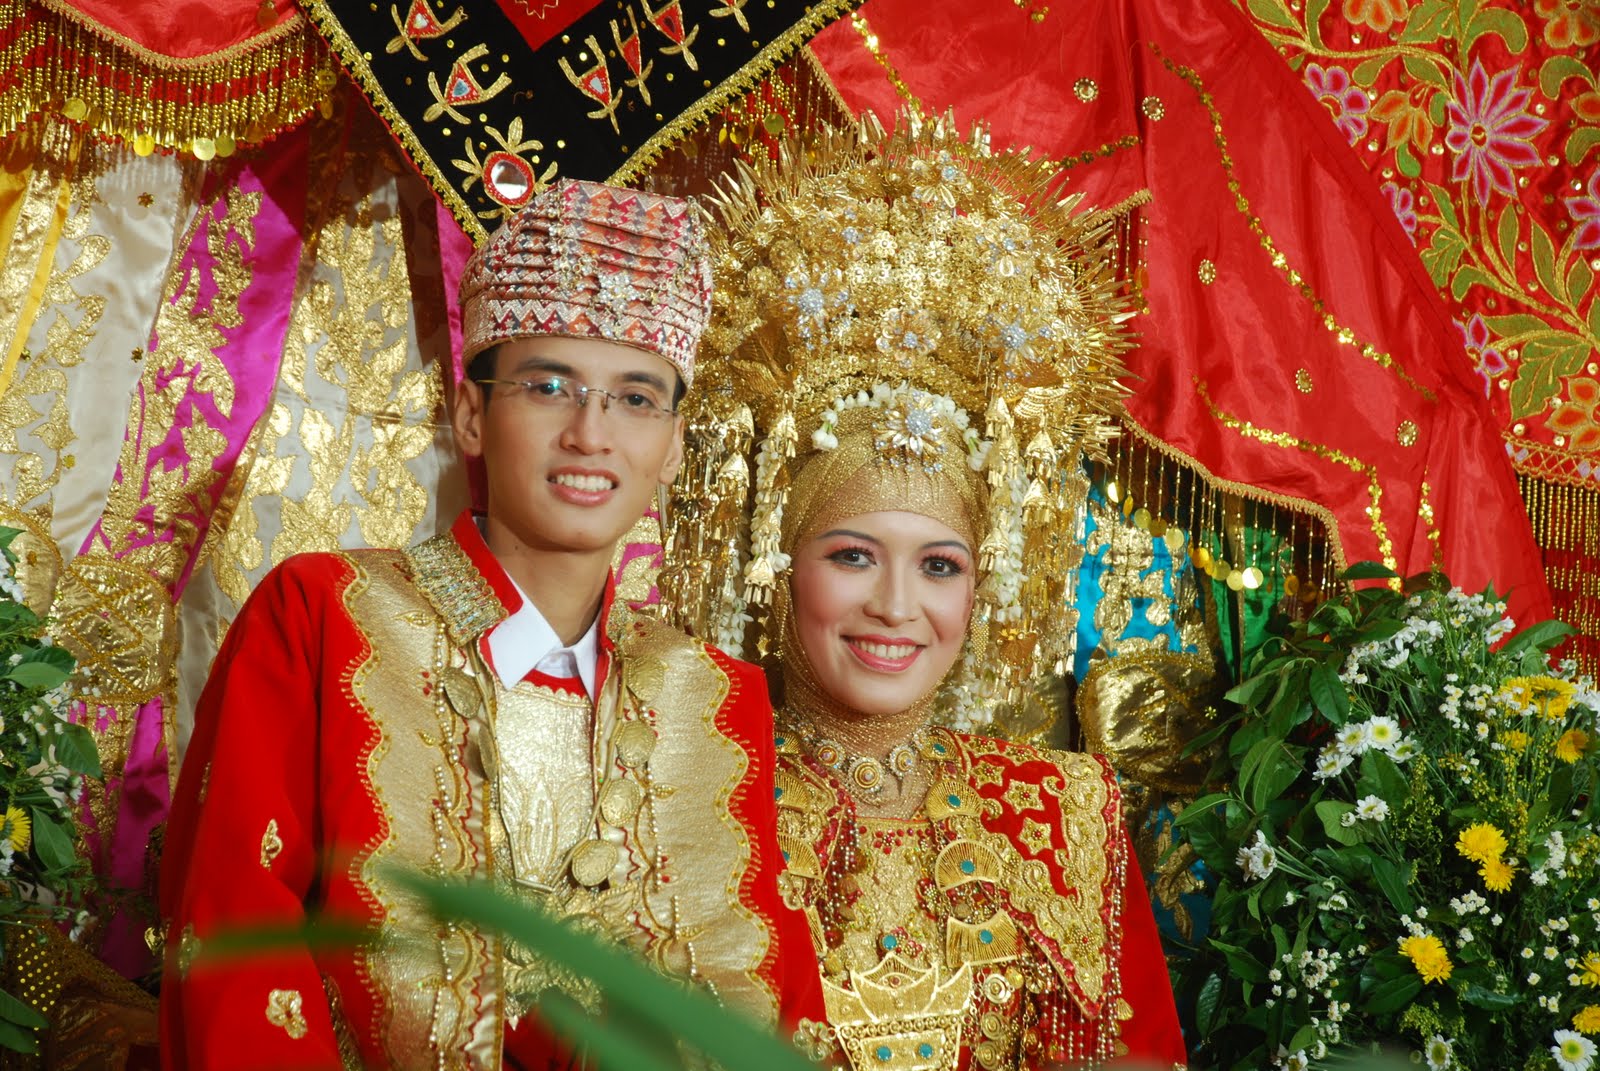 The Tausugs or Sulu people still practice traditional marriage 